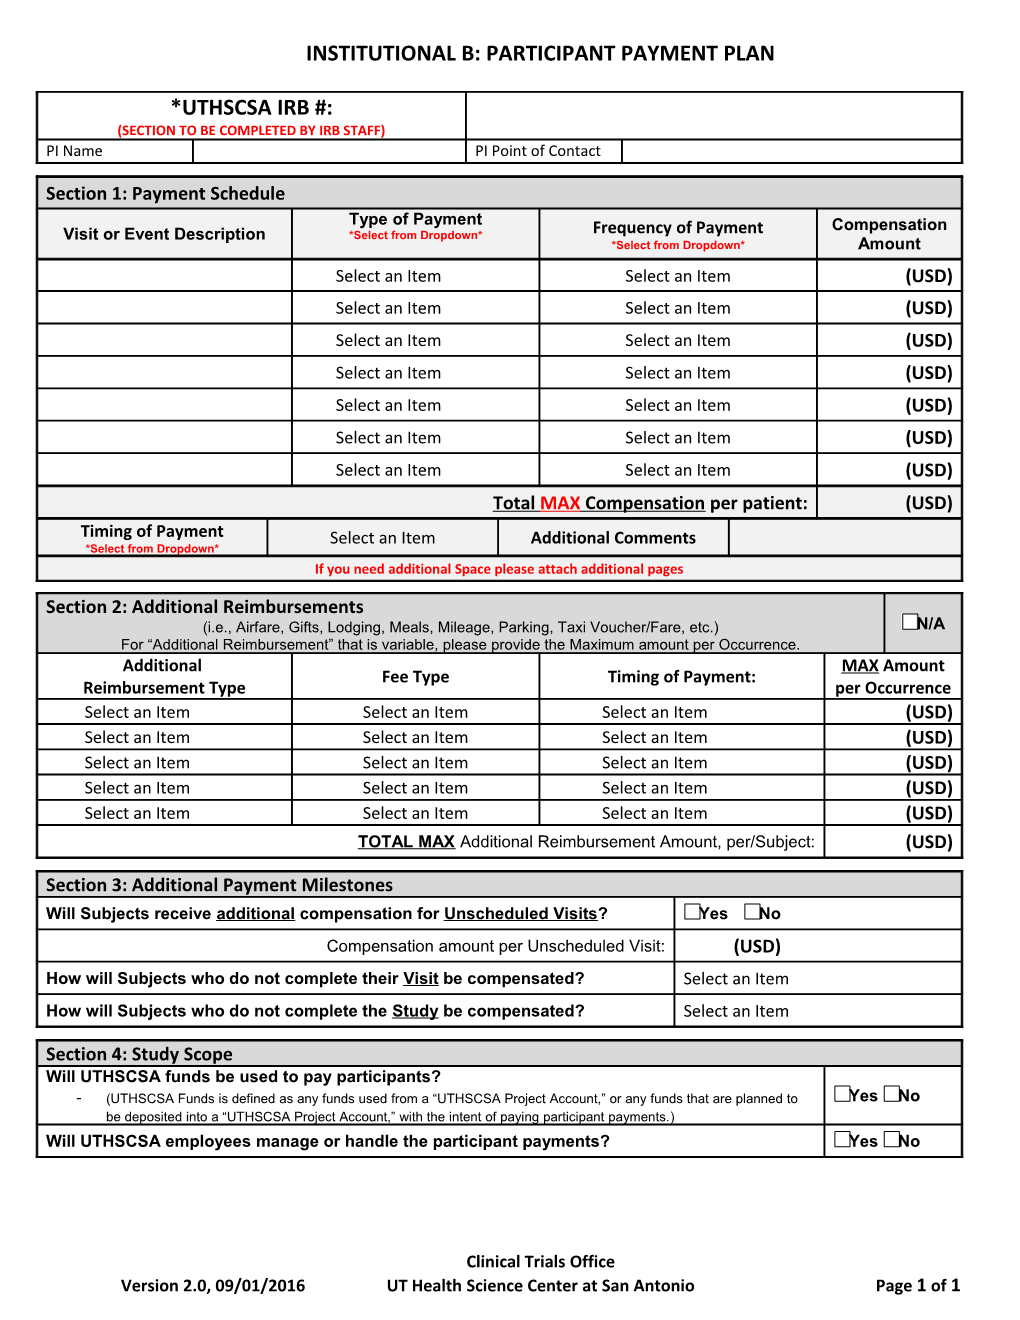 Institutional B: Participant Payment Plan